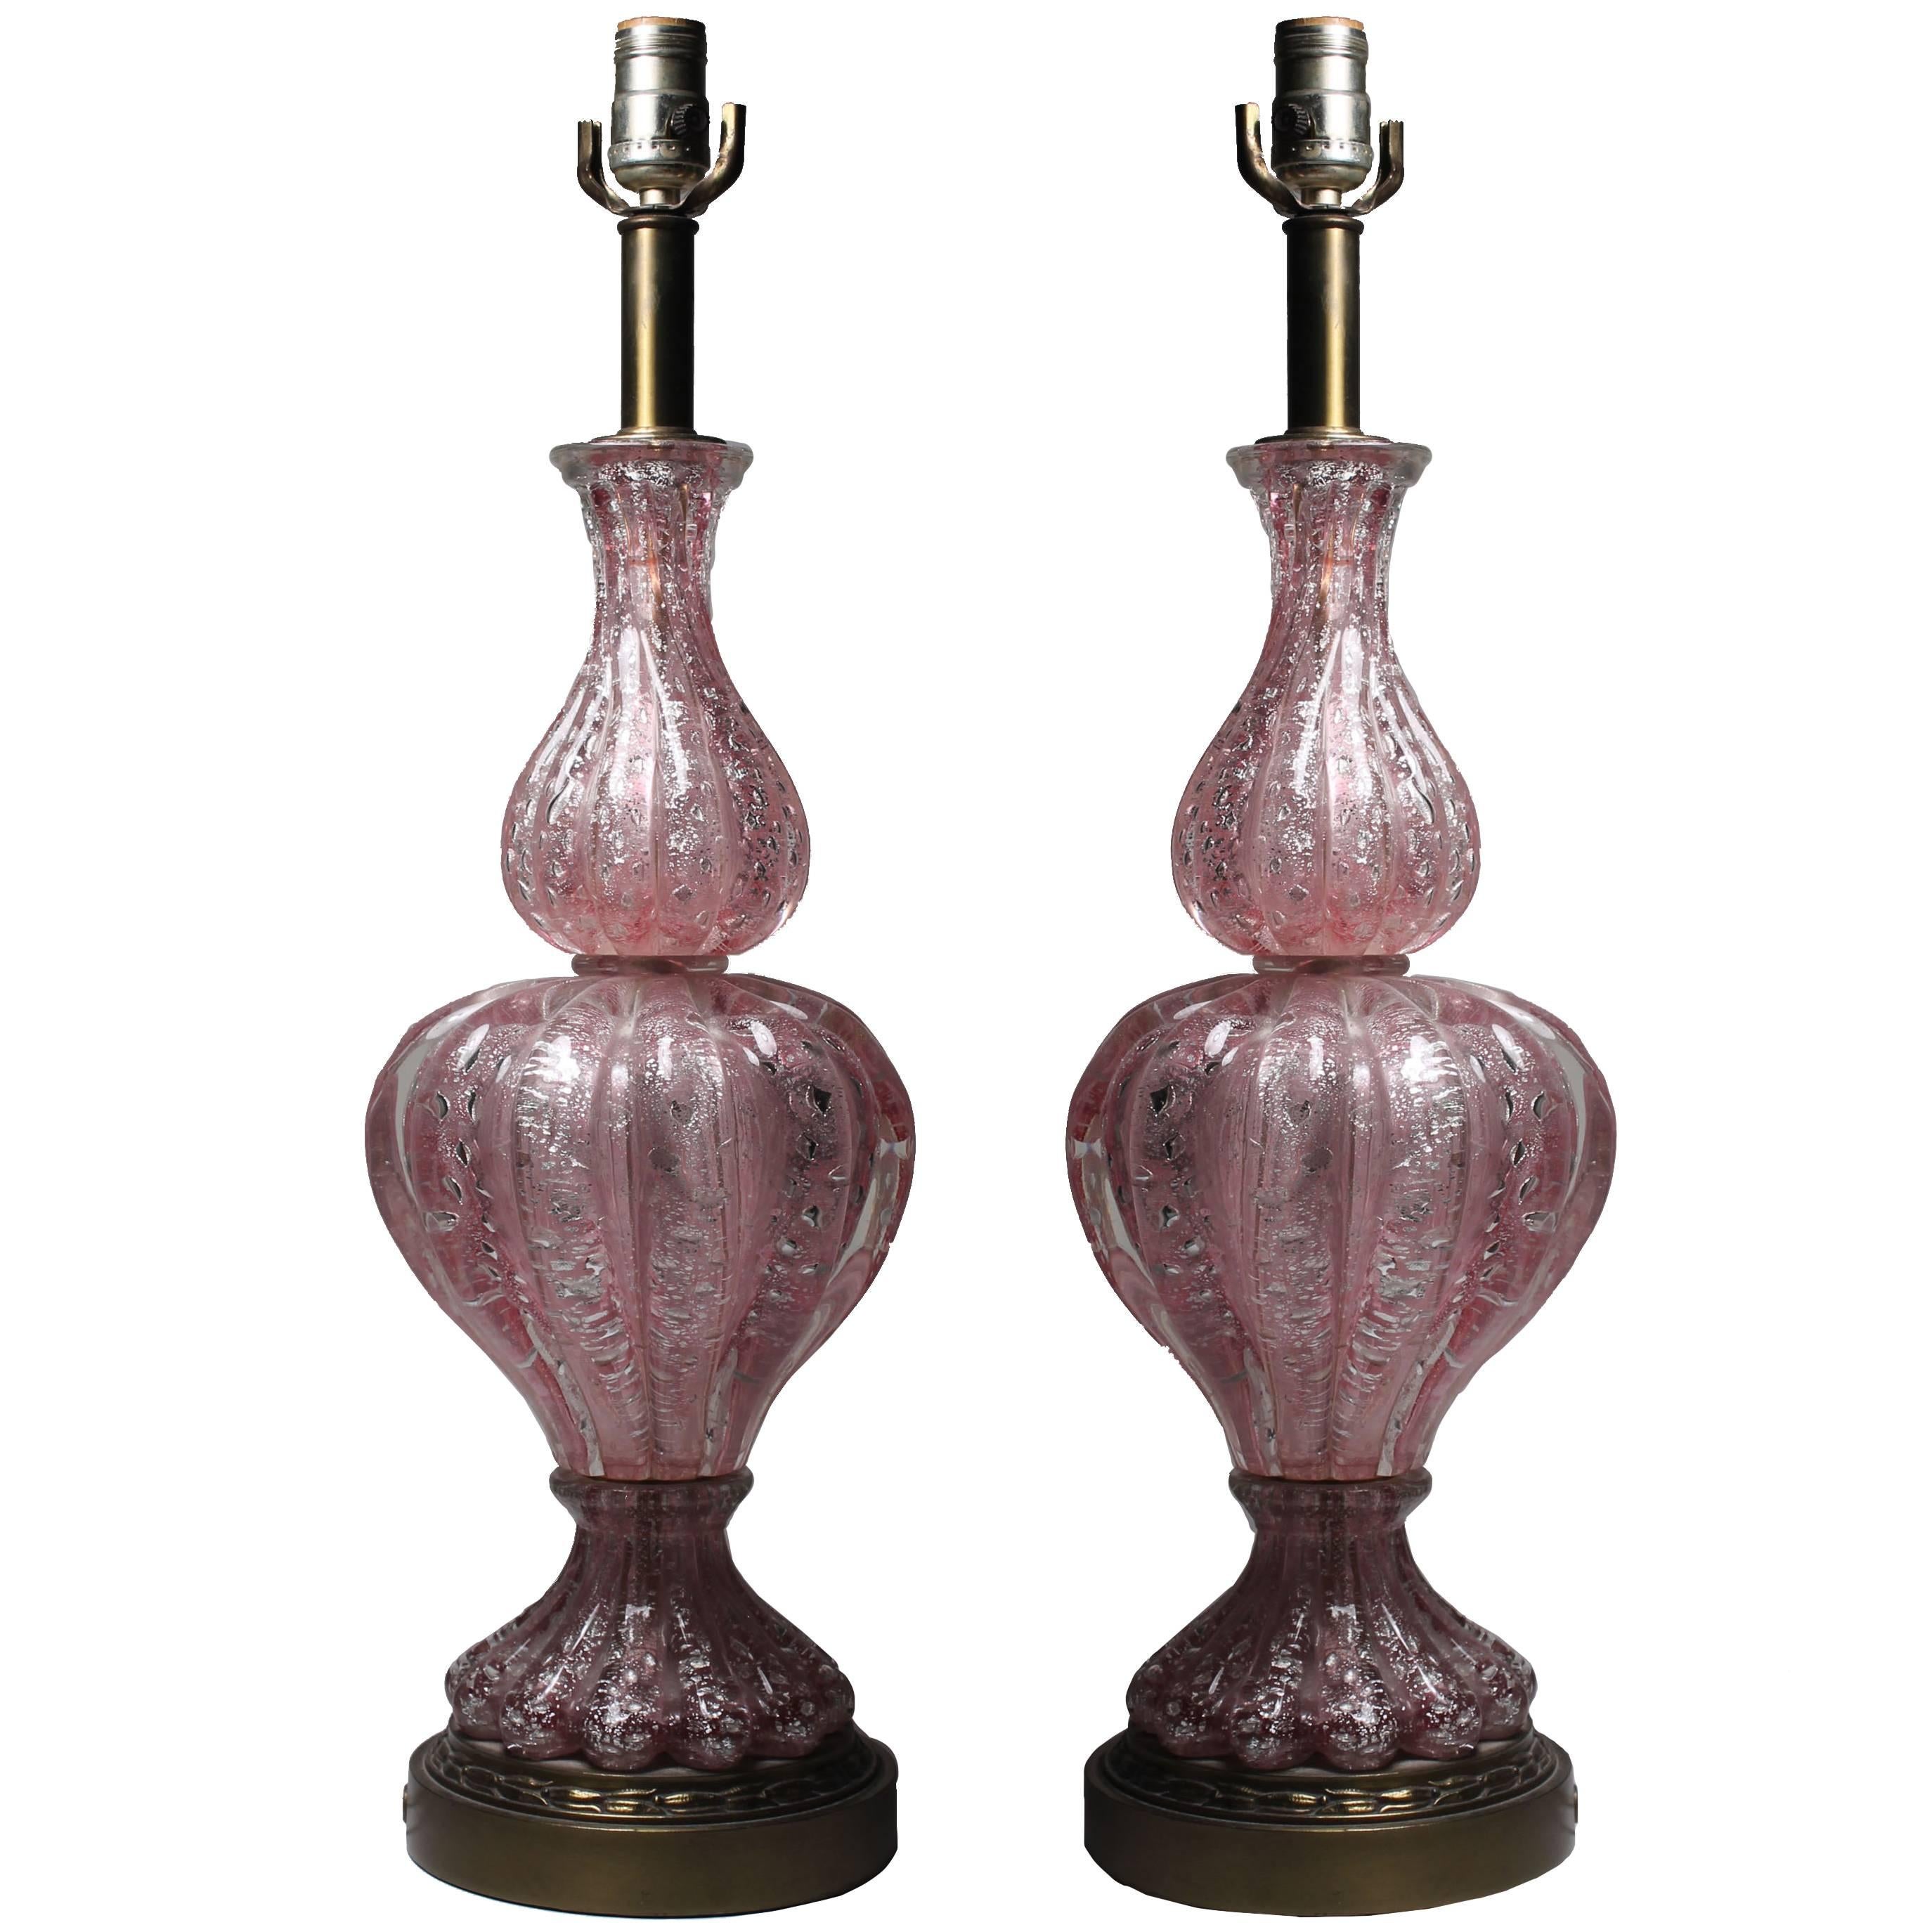 Pair of Vintage Pink Murano Glass Lamps with Silver Foil by Barovier